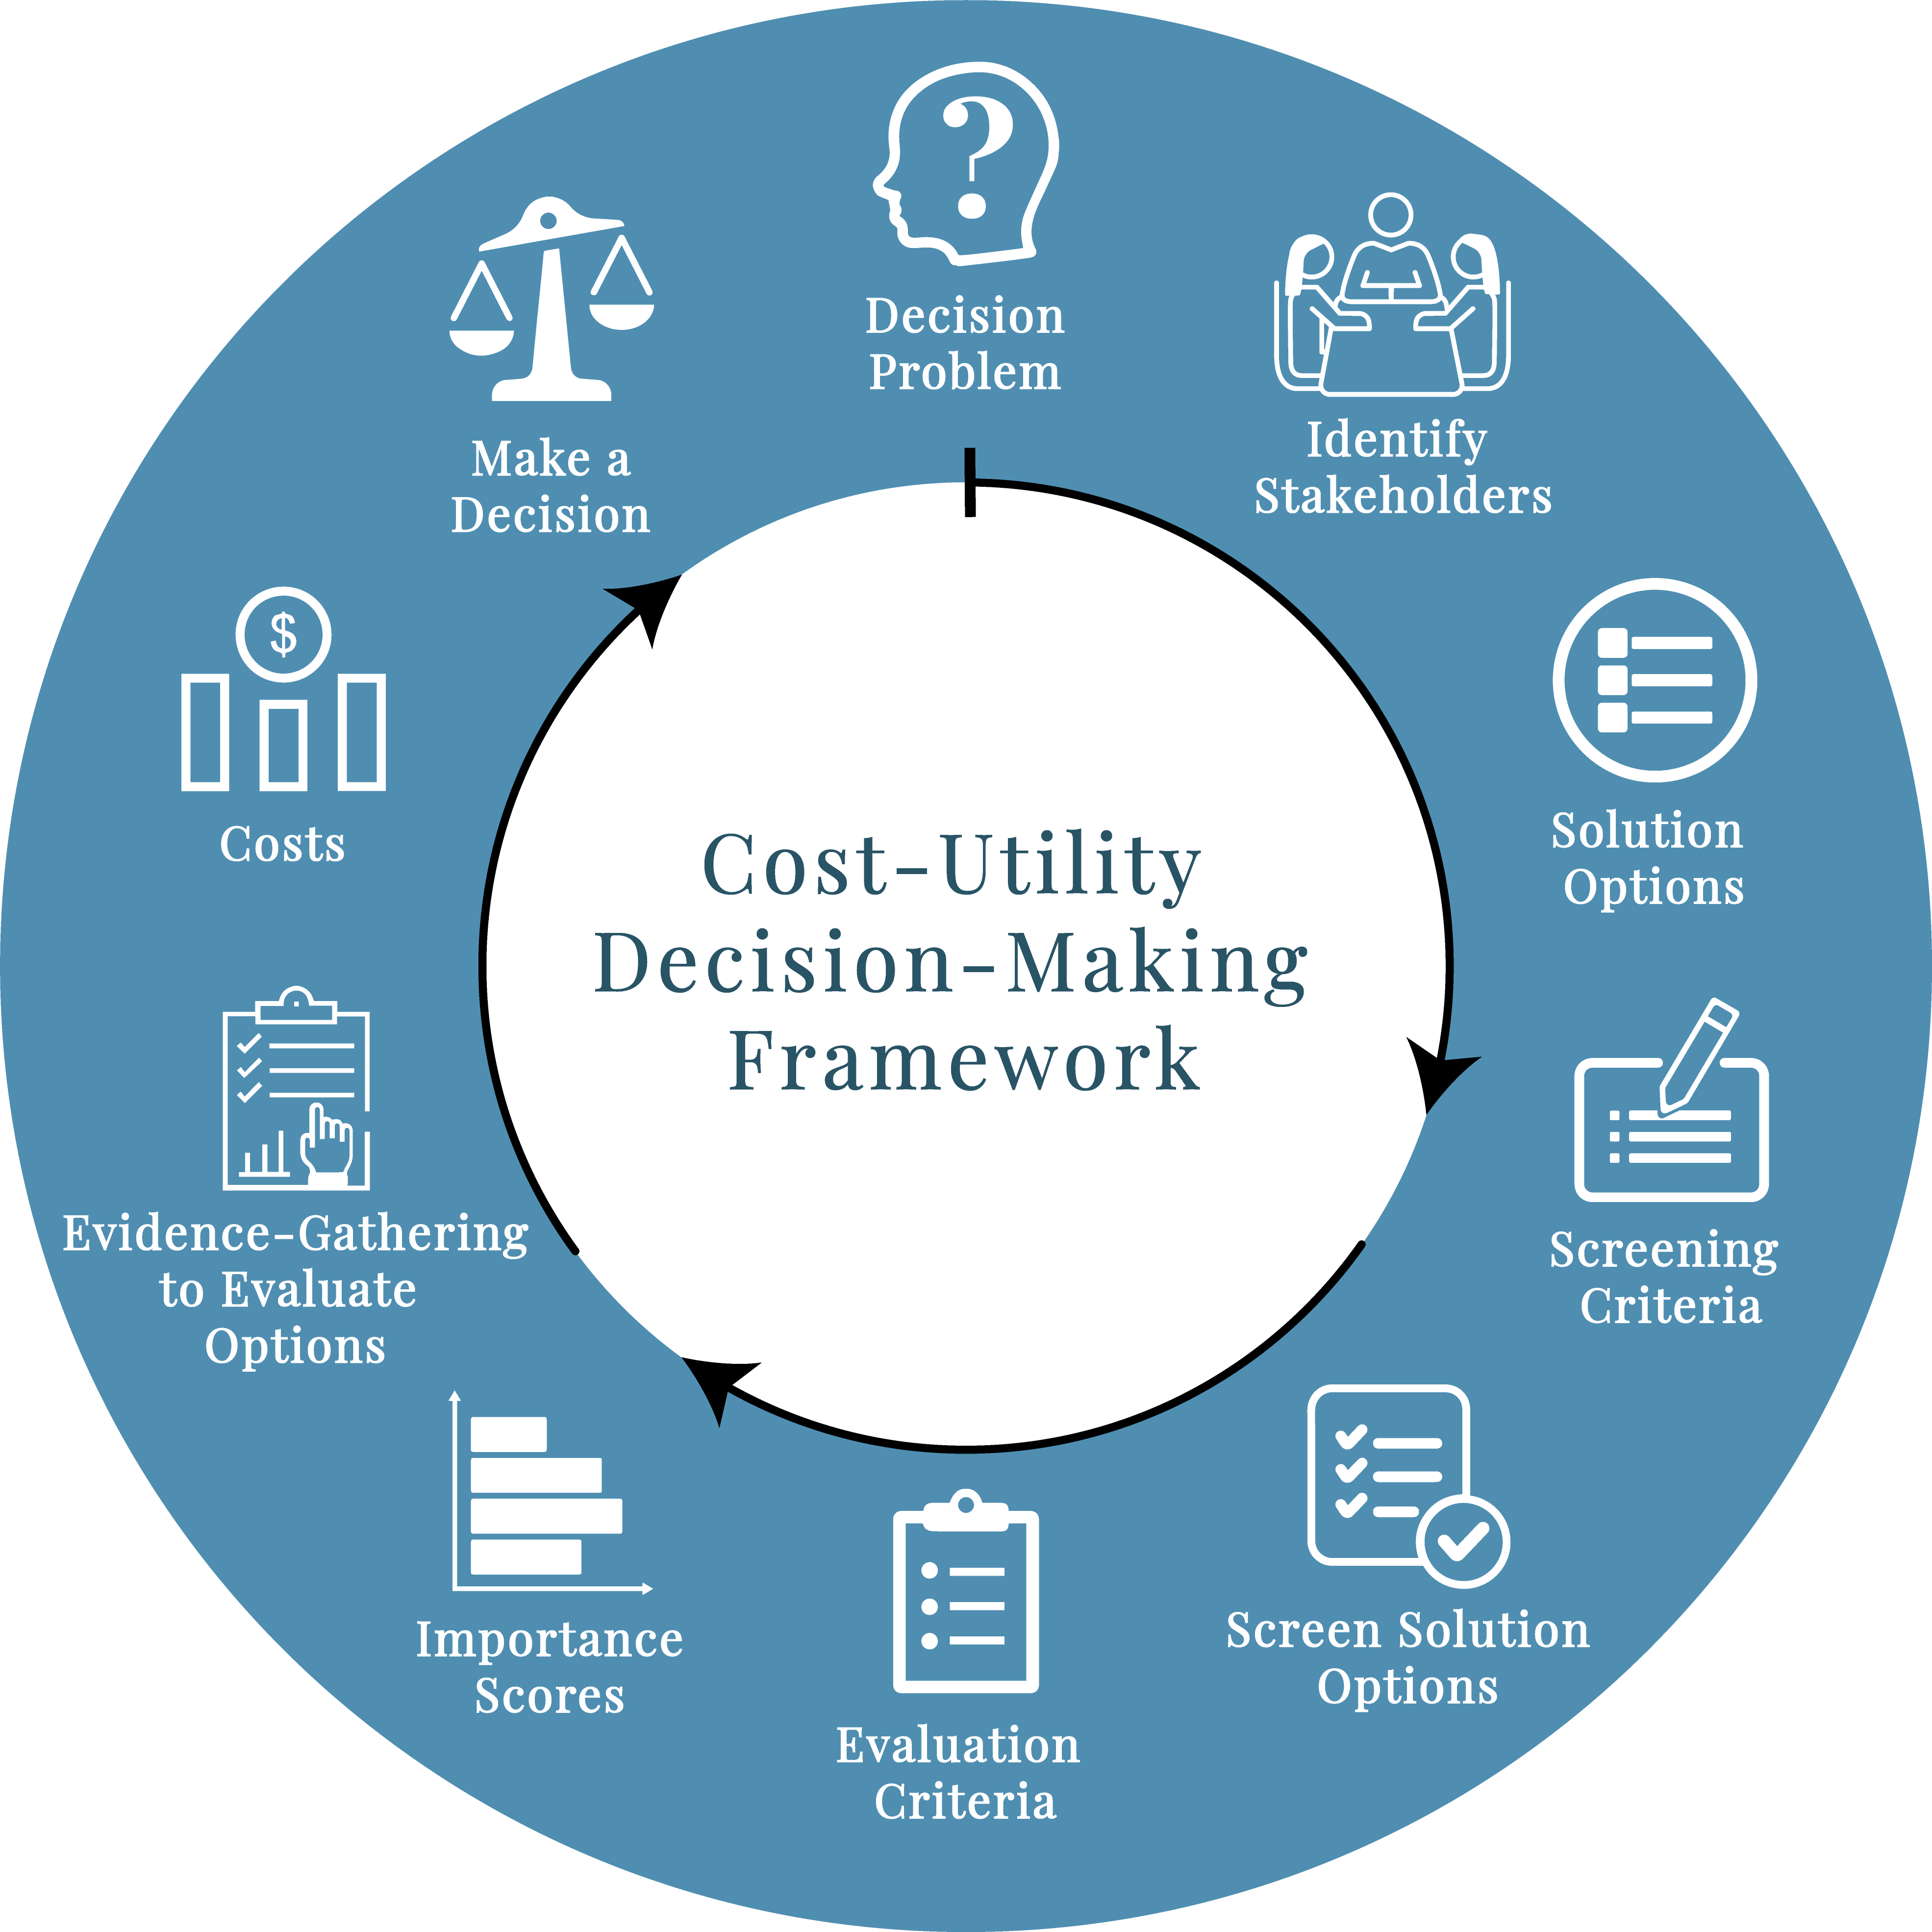 Chart the depicts Cost-Utility Decision-Making Framework: Decision Problem, Identify Stakeholders, Solution Options, Screening Criteria, Screen Solution Options, Evaluation Criteria, Importance Score, Evidence-Gathering to Evaluate Options, Costs, Make a Decision